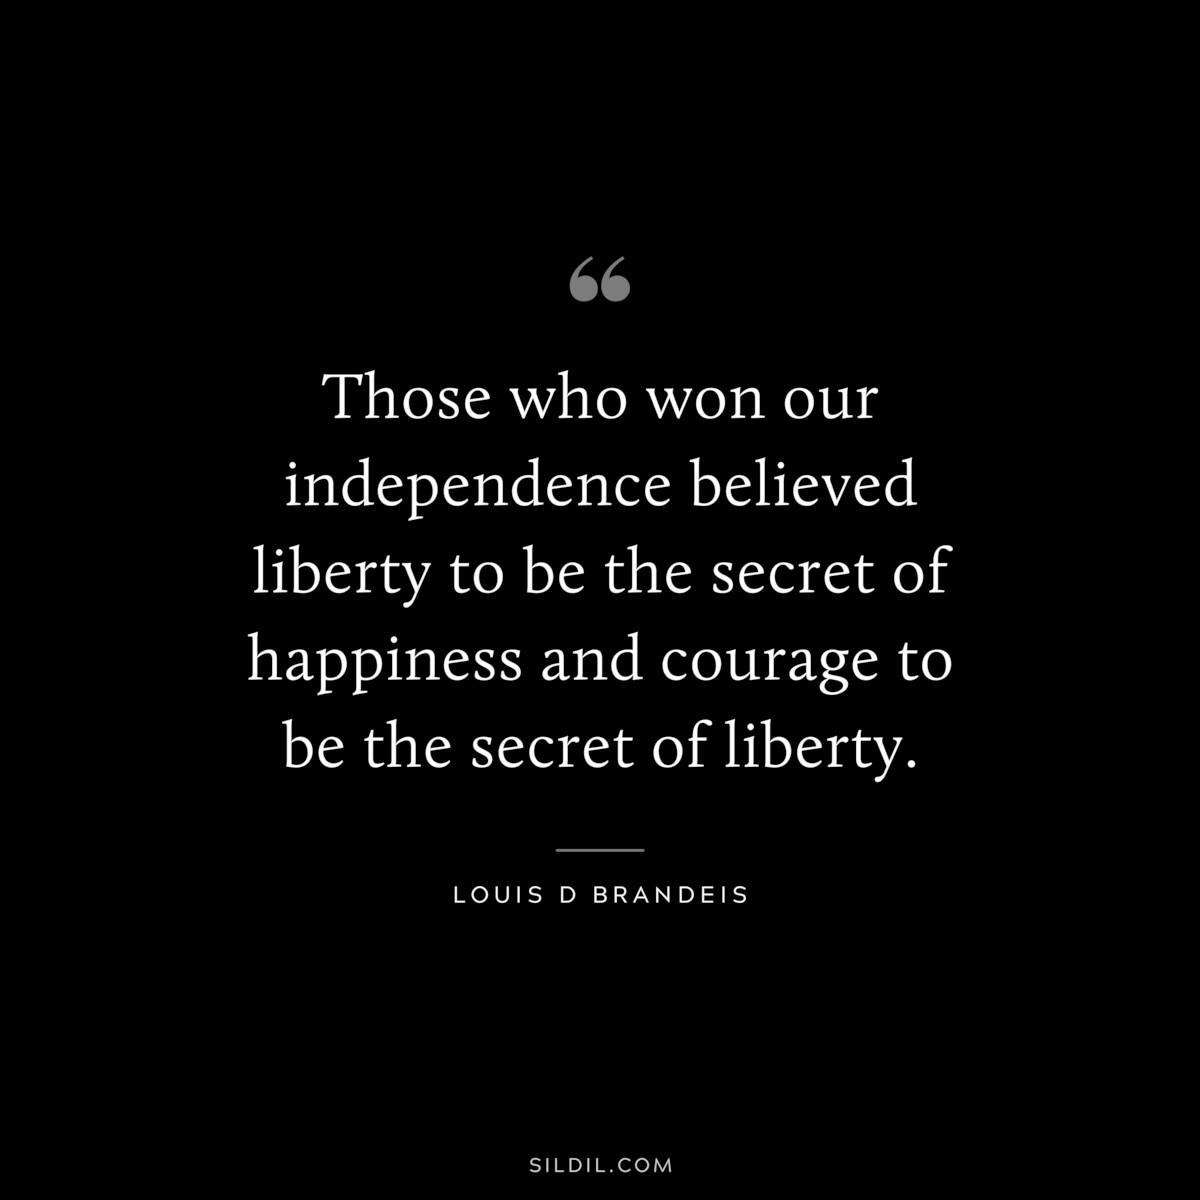 Those who won our independence believed liberty to be the secret of happiness and courage to be the secret of liberty. ― Louis D Brandeis